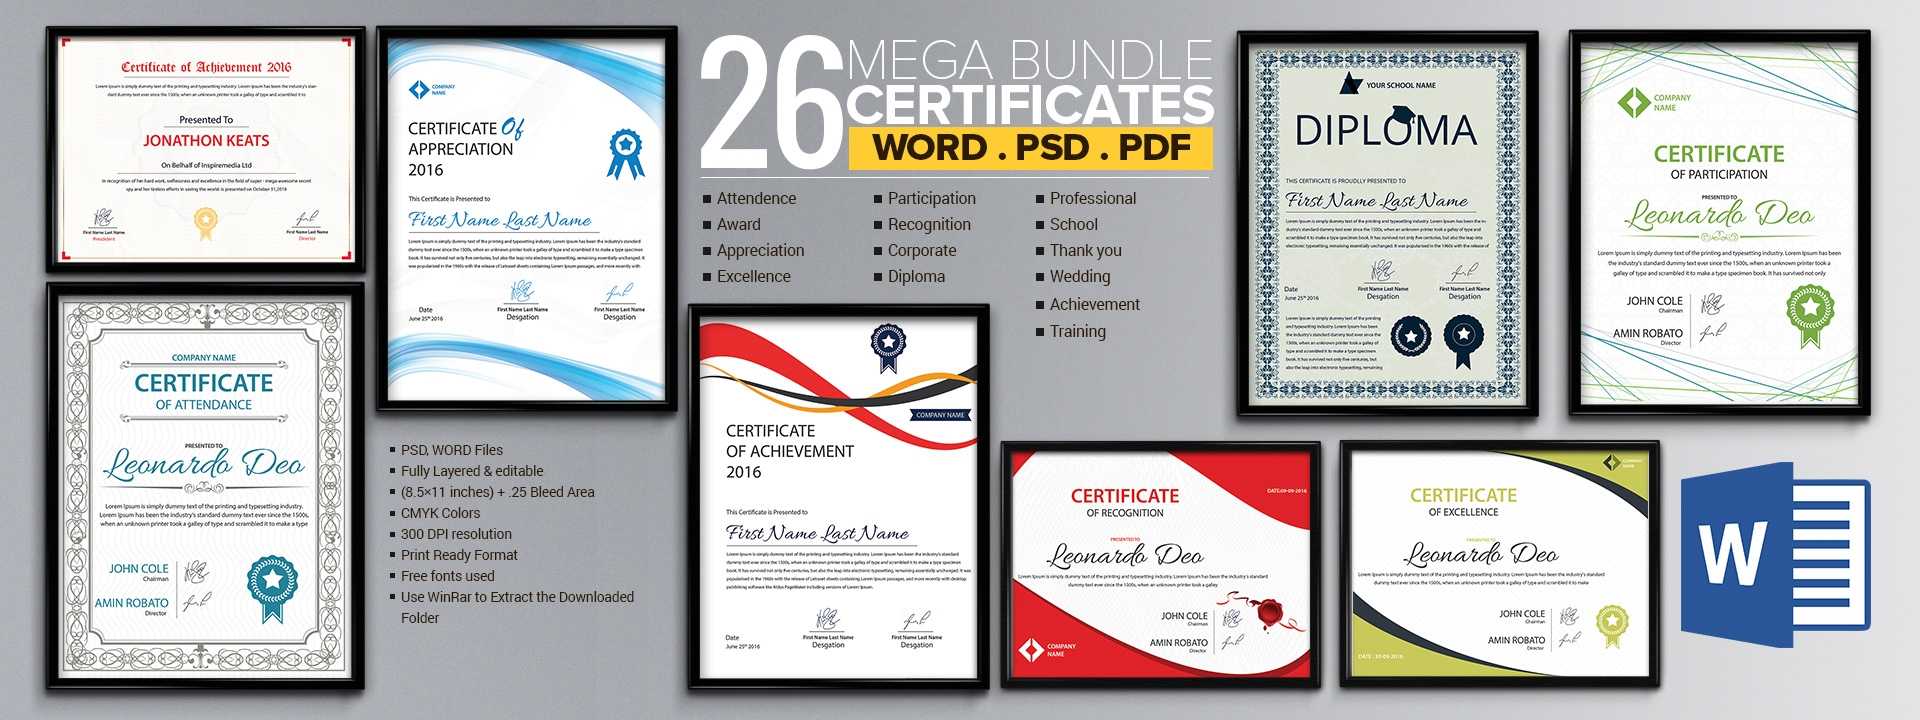 Word Certificate Template – 53+ Free Download Samples With Regard To Free Certificate Templates For Word 2007